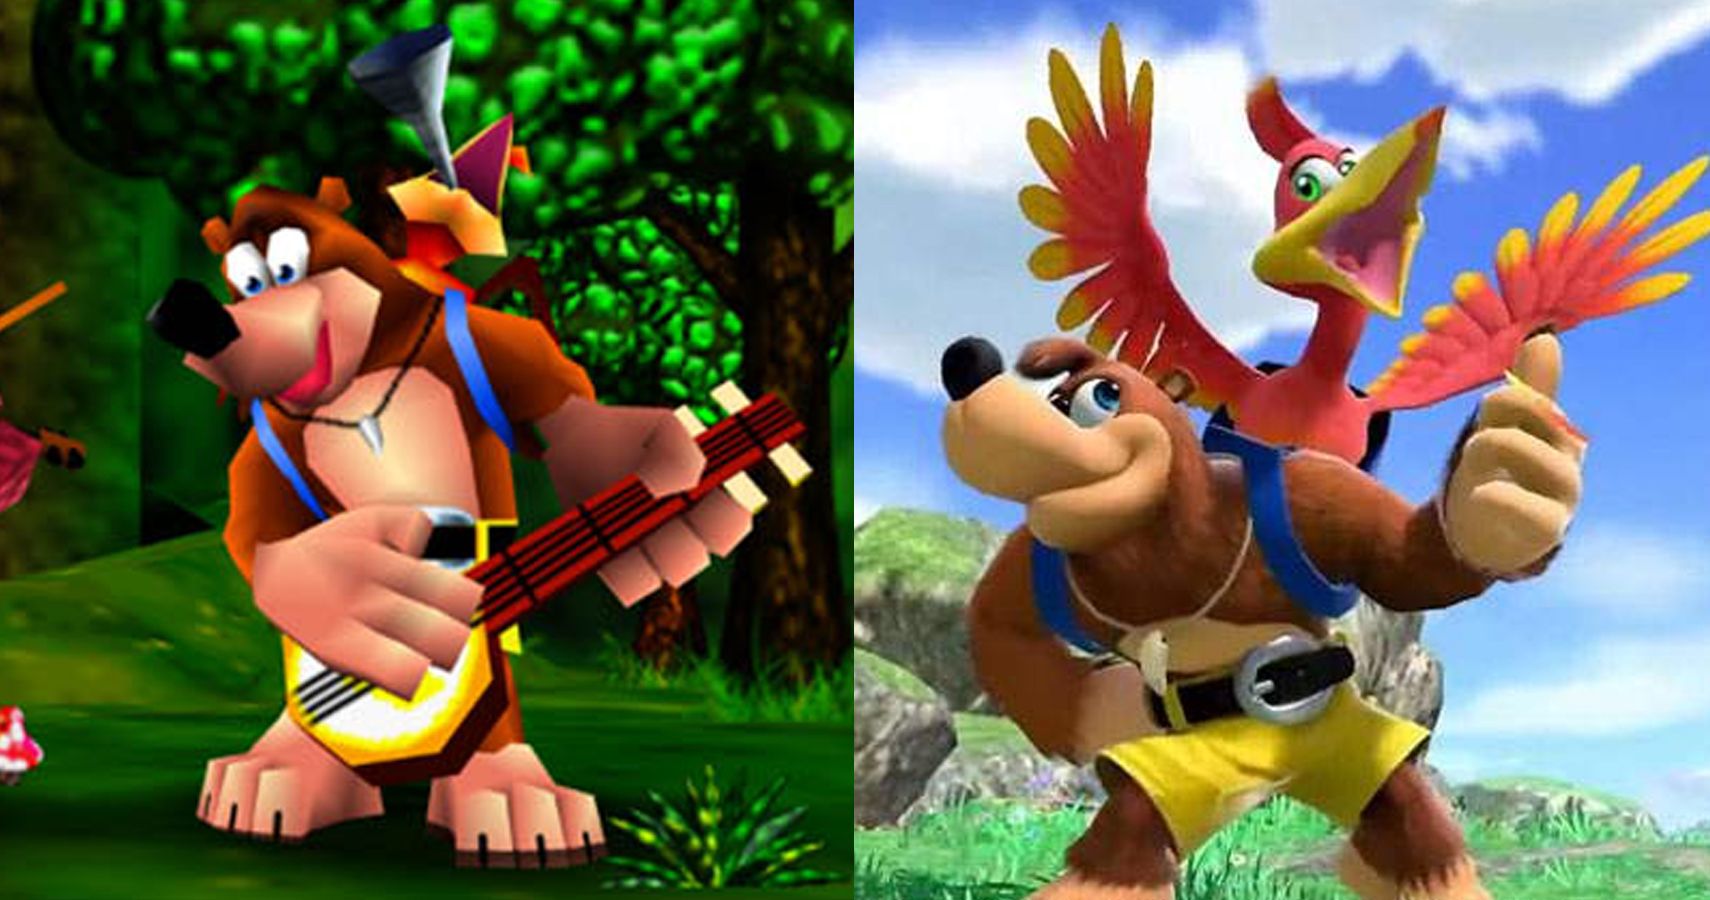 Xbox Character Redesigns 8 banjo kazooie